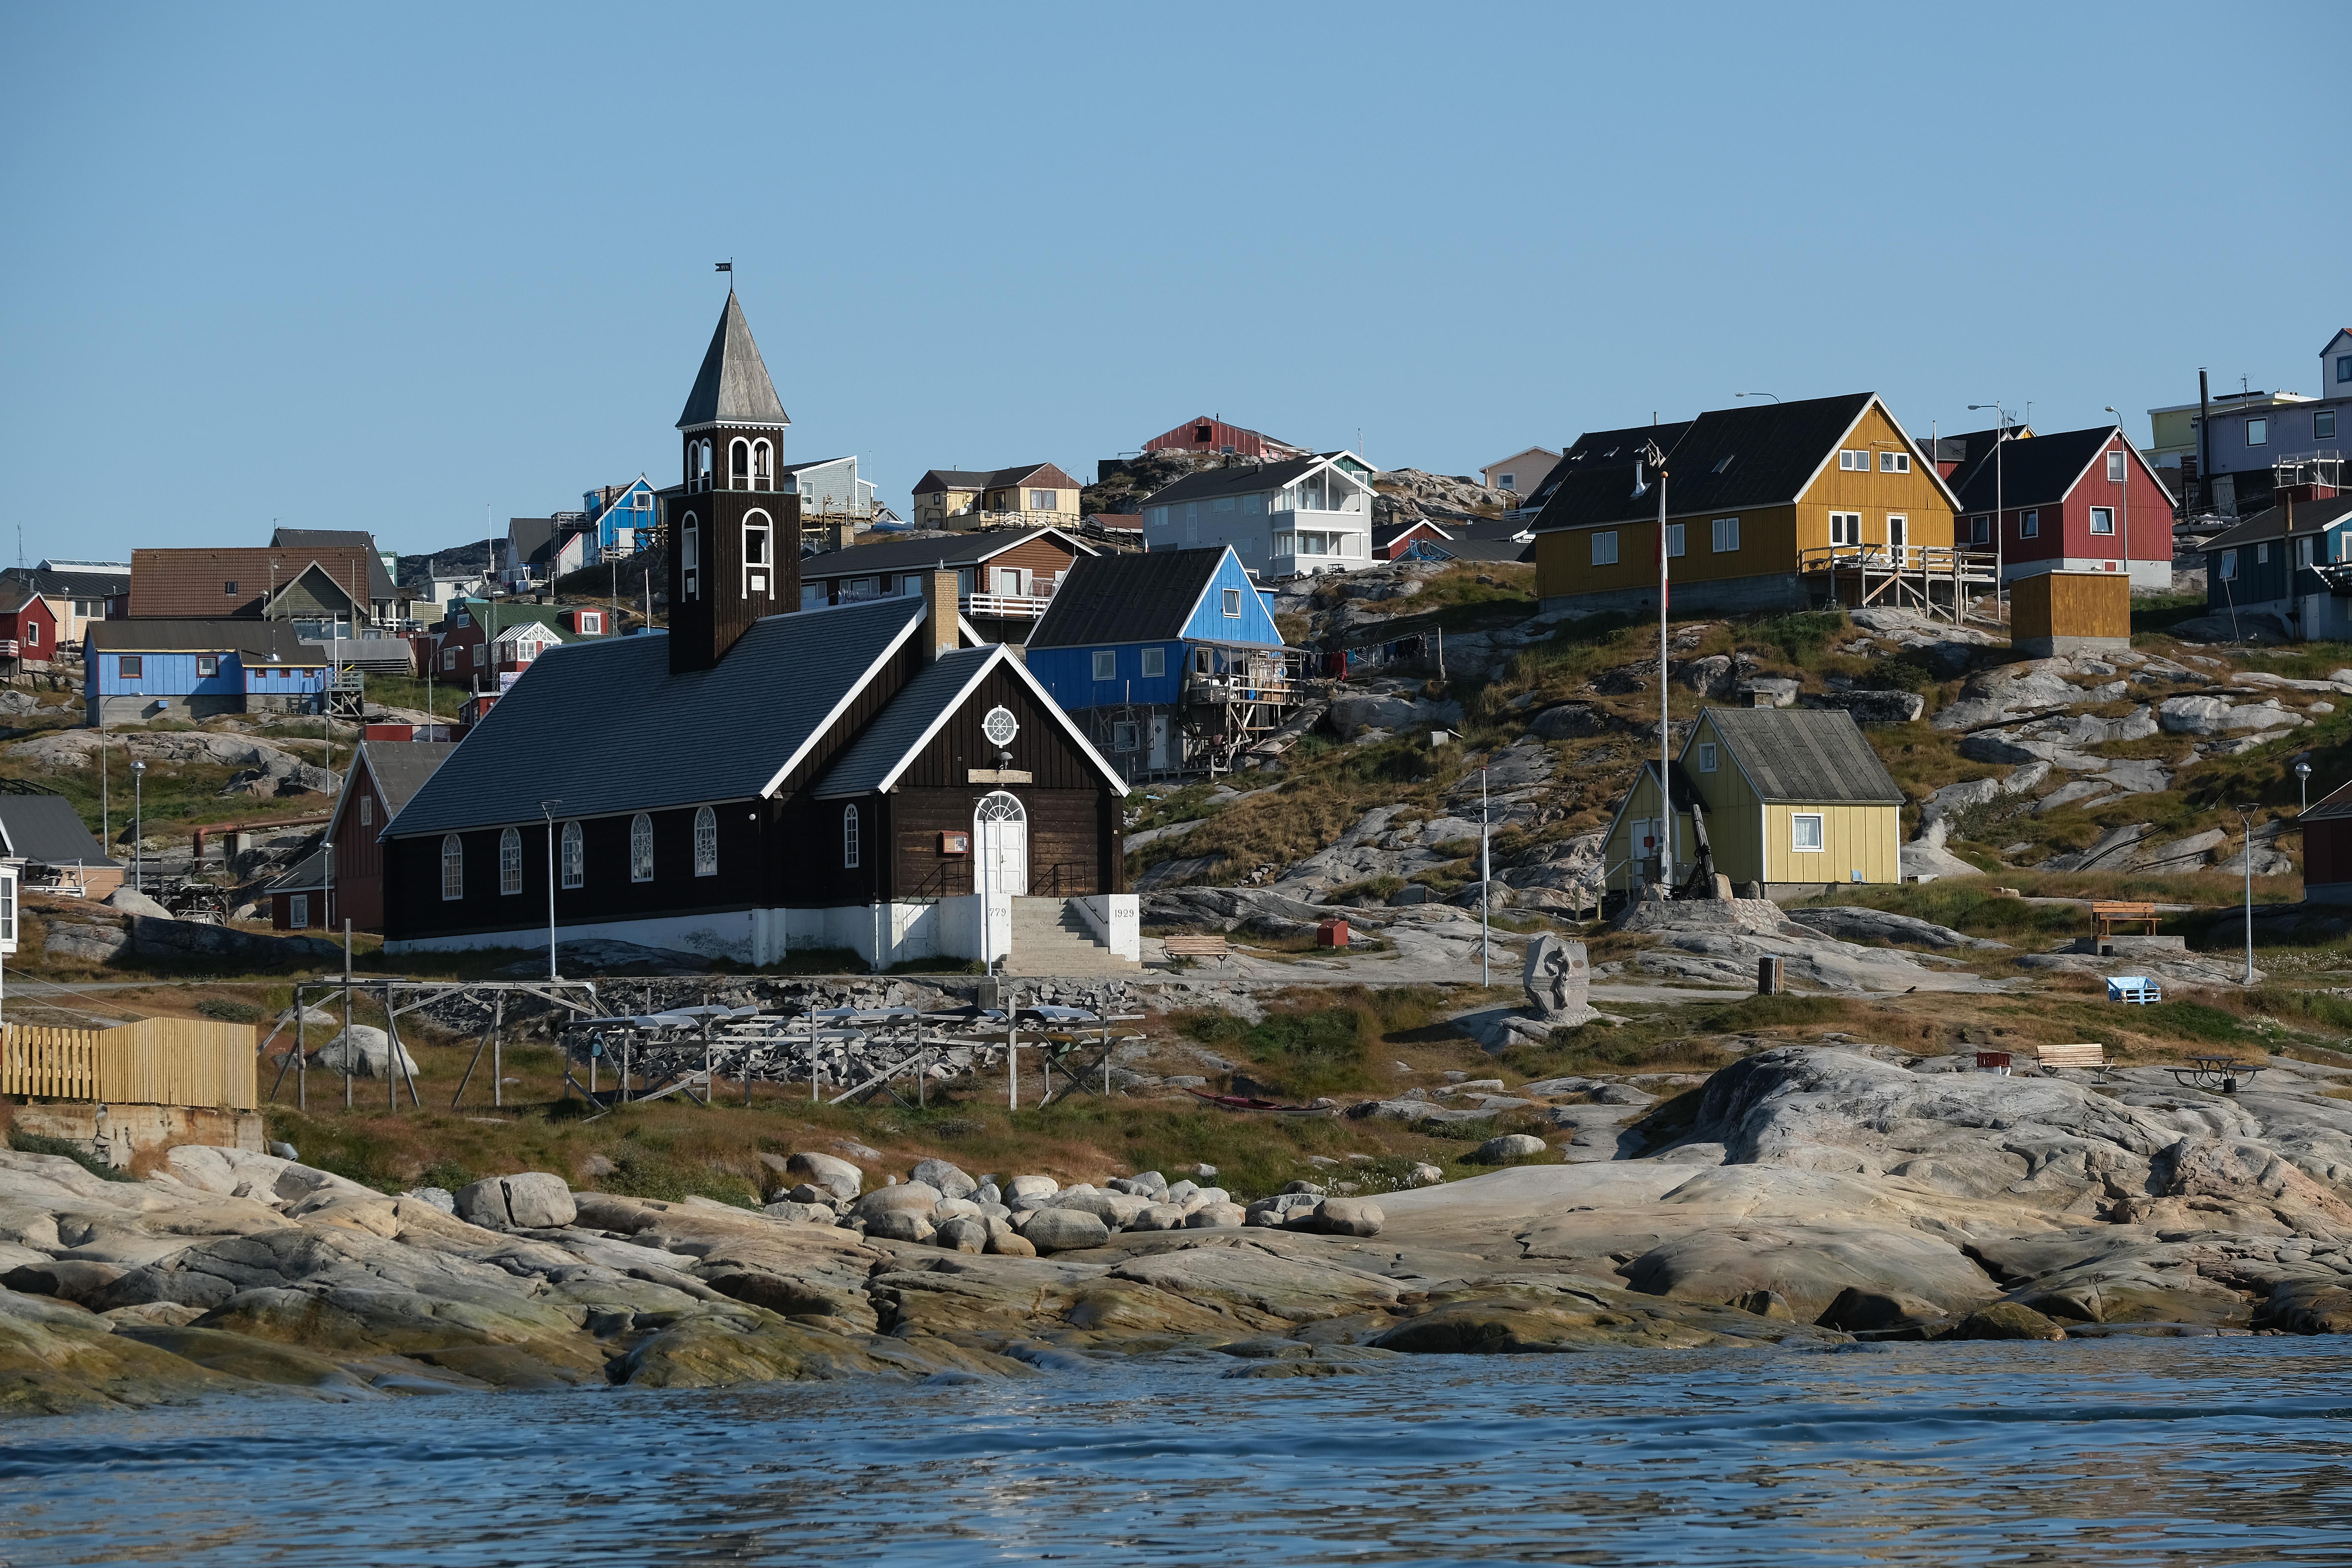 A church and a cluster of colorful buildings near a rocky beach.